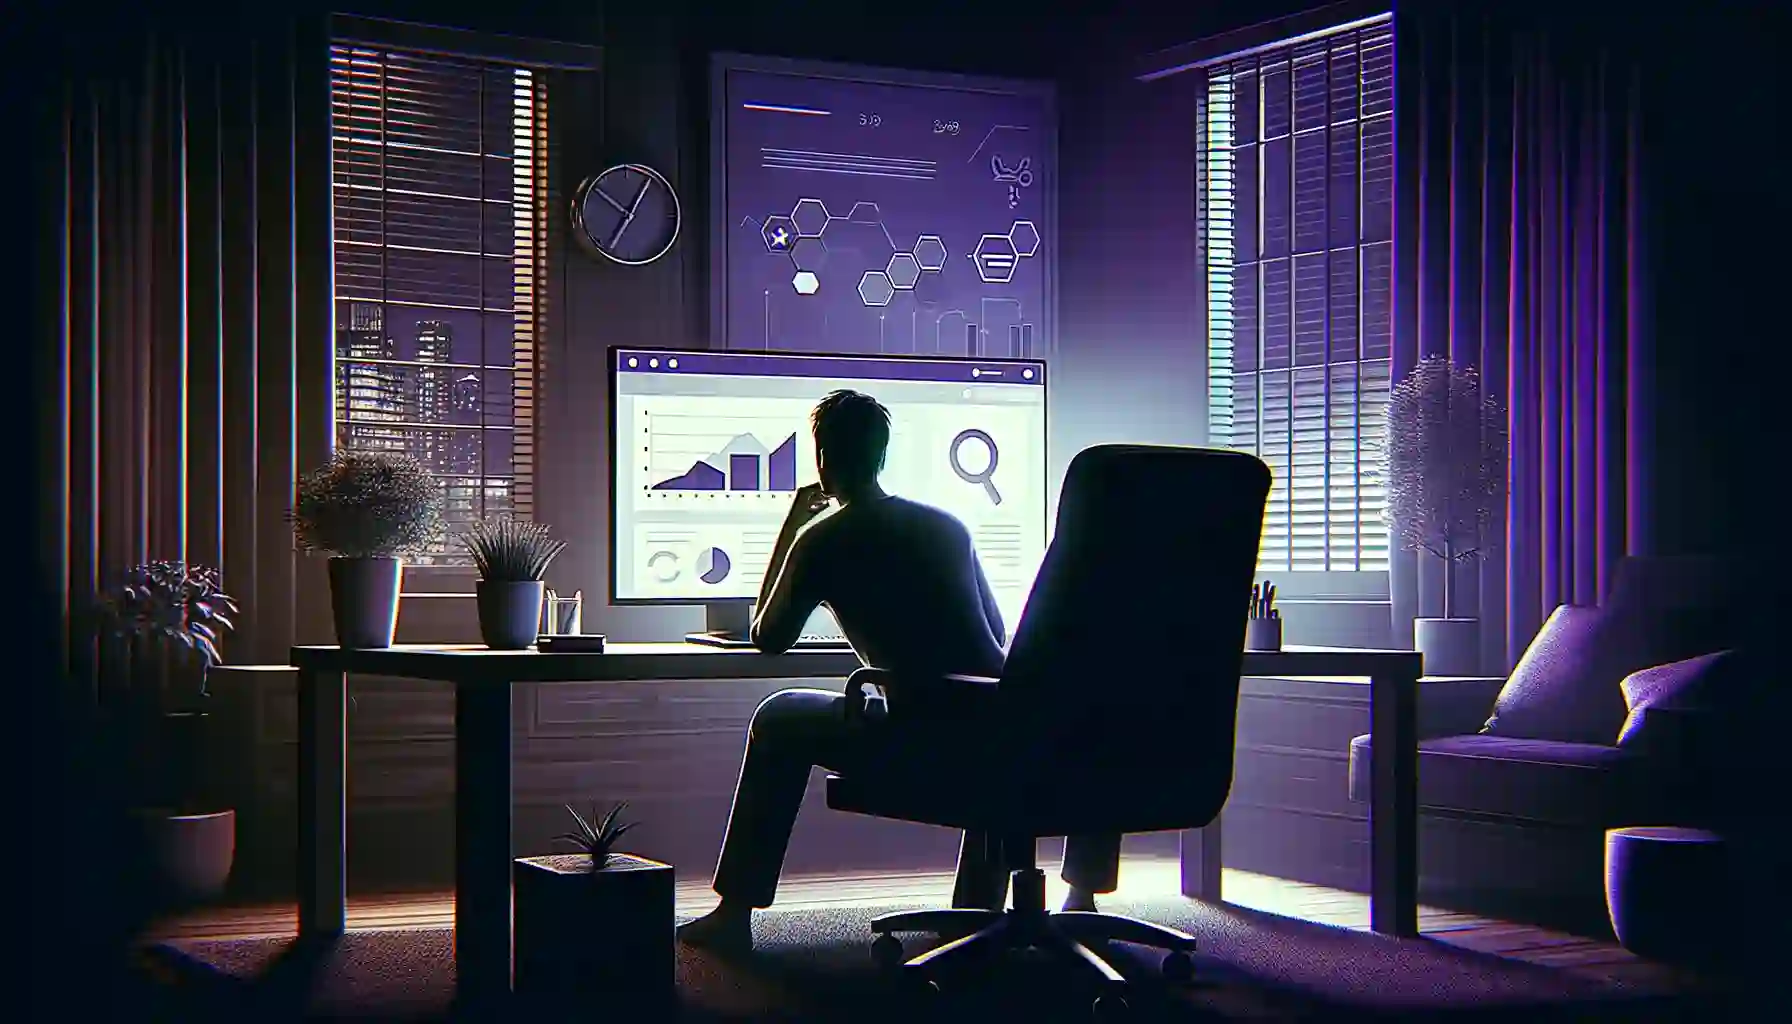 a man sitting in front of a computer